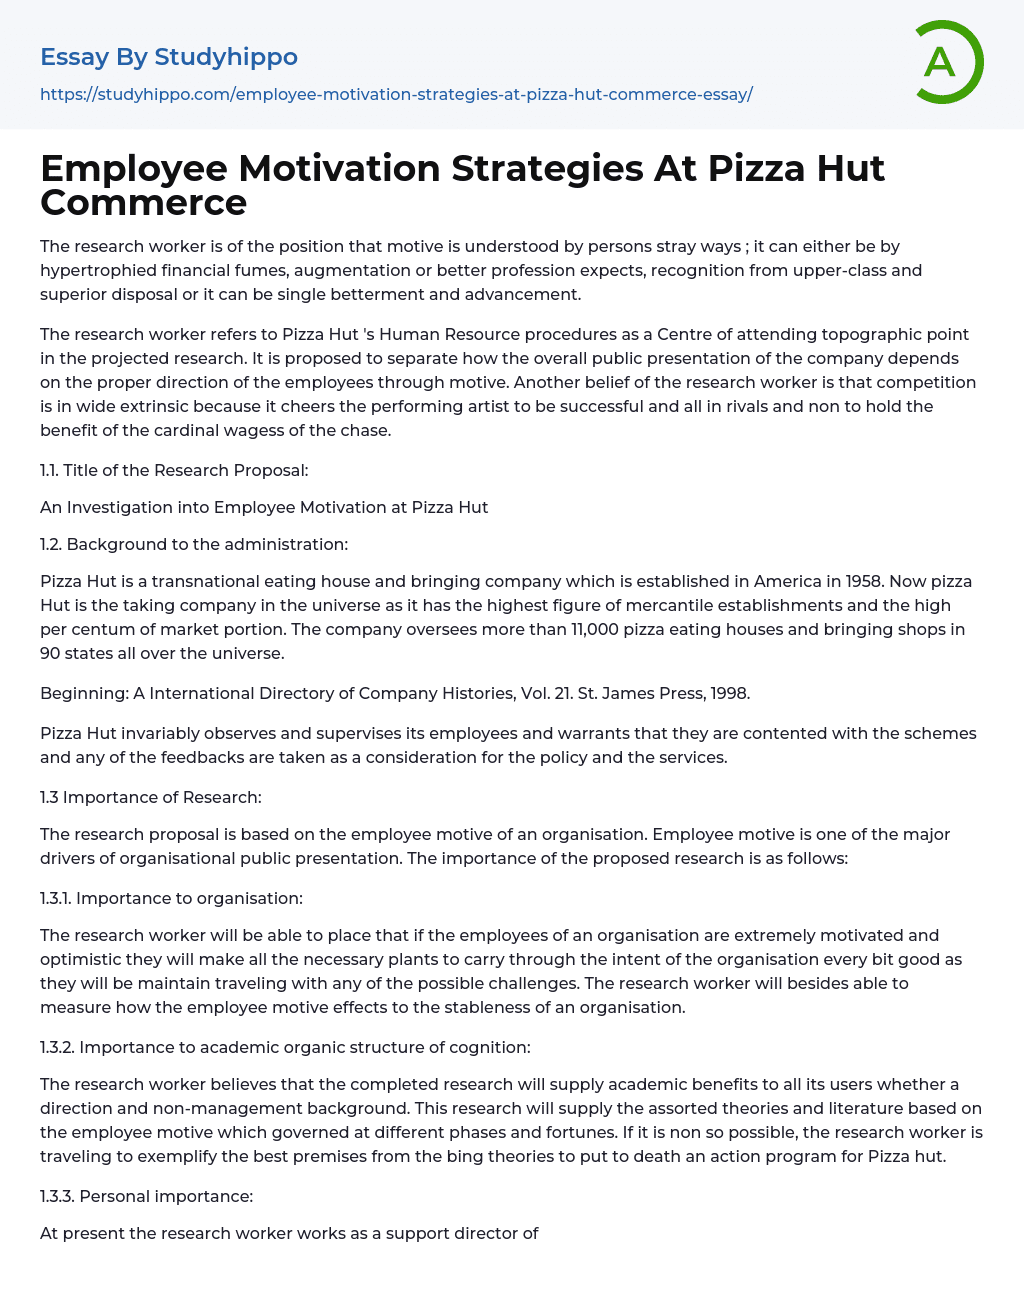 Employee Motivation Strategies At Pizza Hut Commerce Essay Example